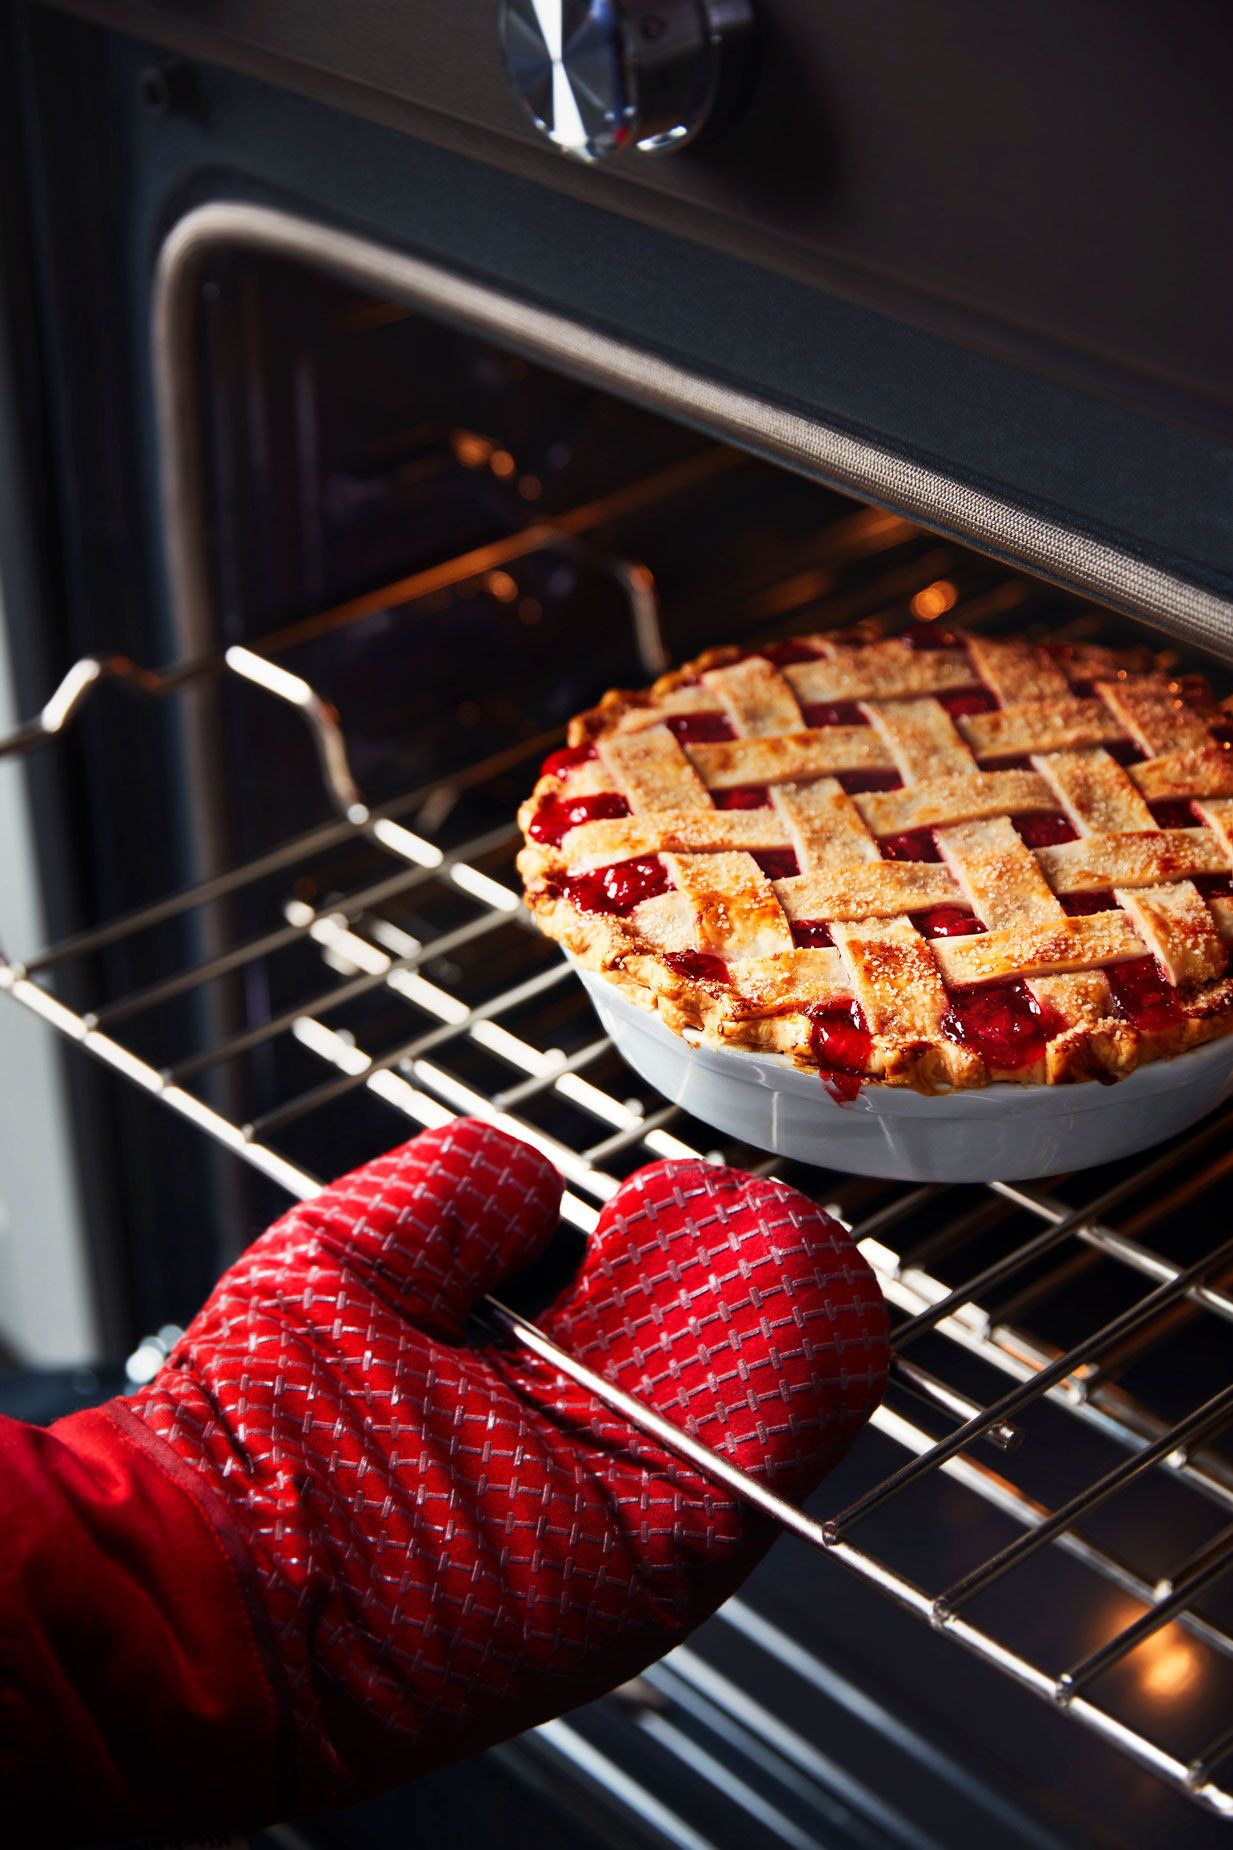 A fresh, flaky pie resting on an oven rack.